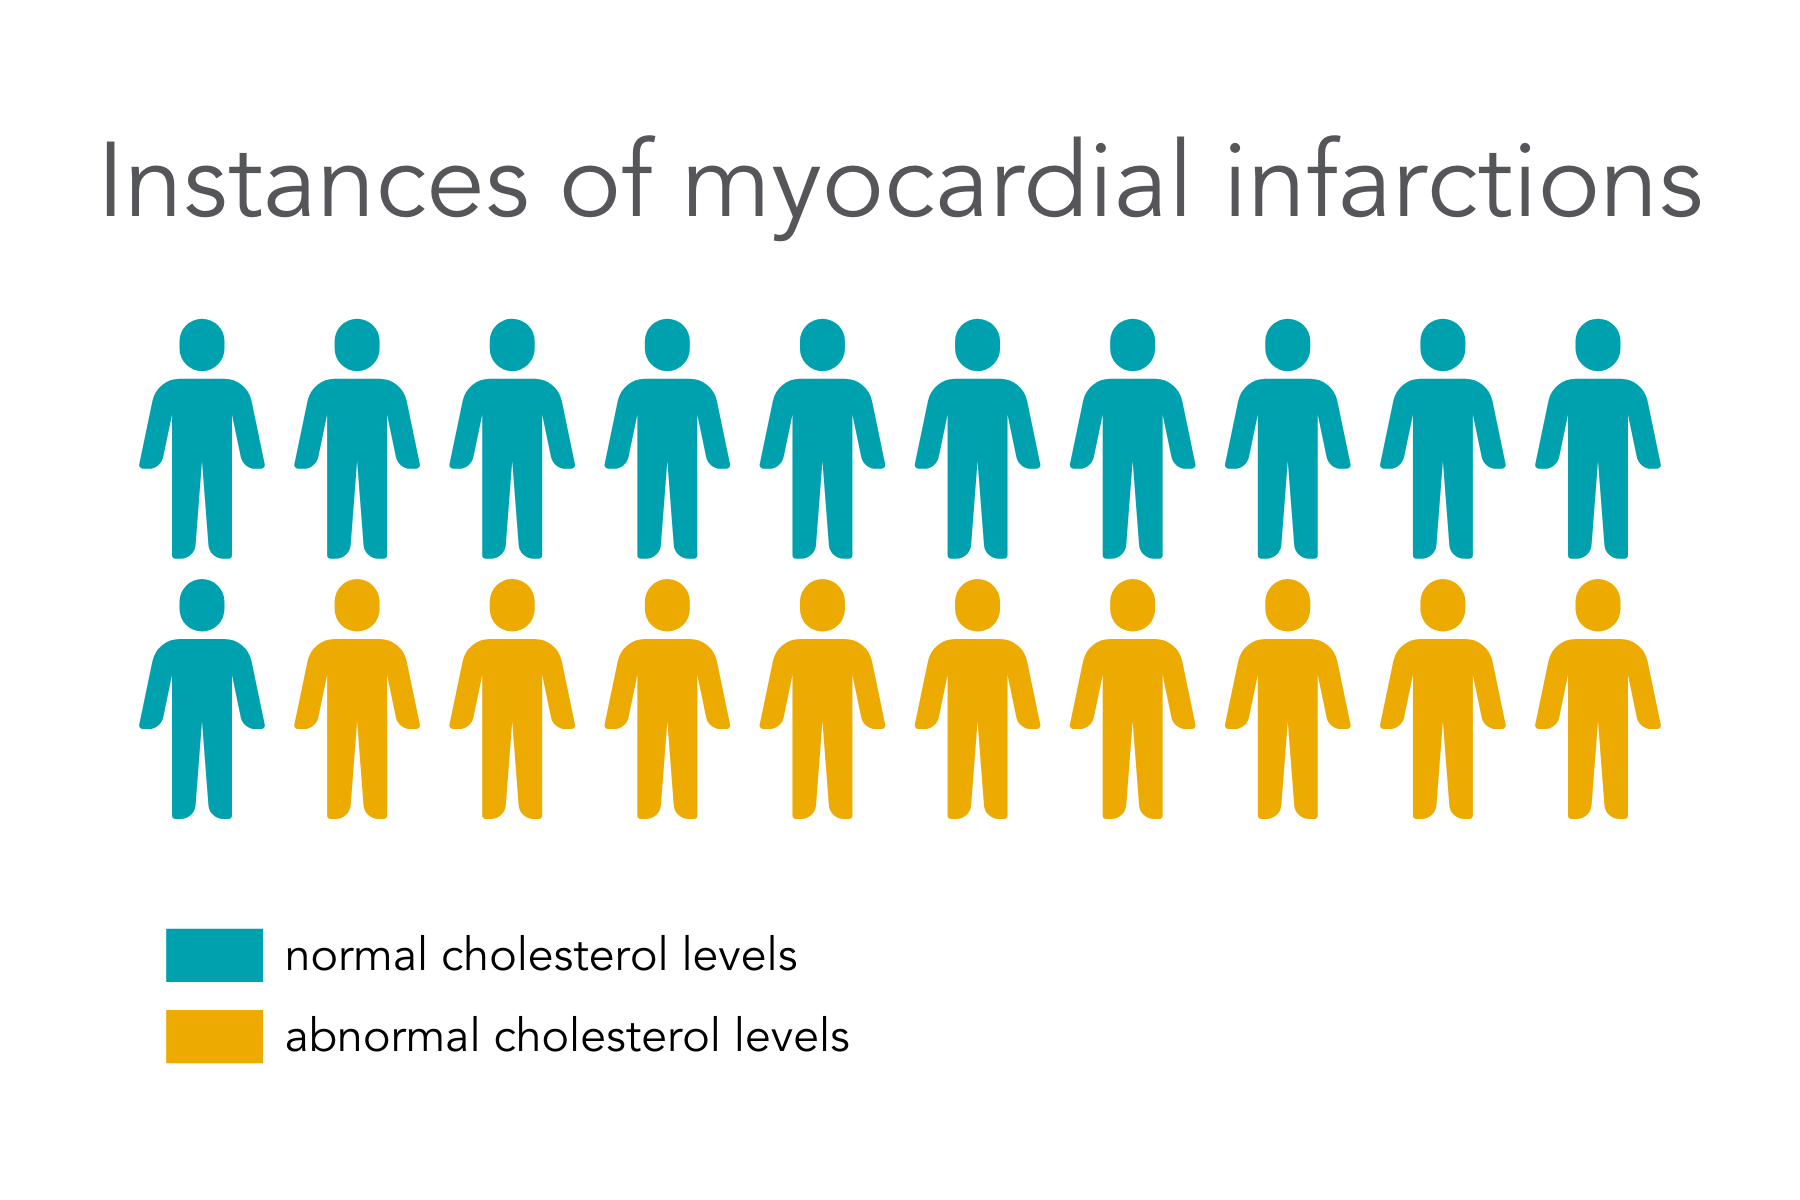 Infographic I Instances of myocardial infarctions